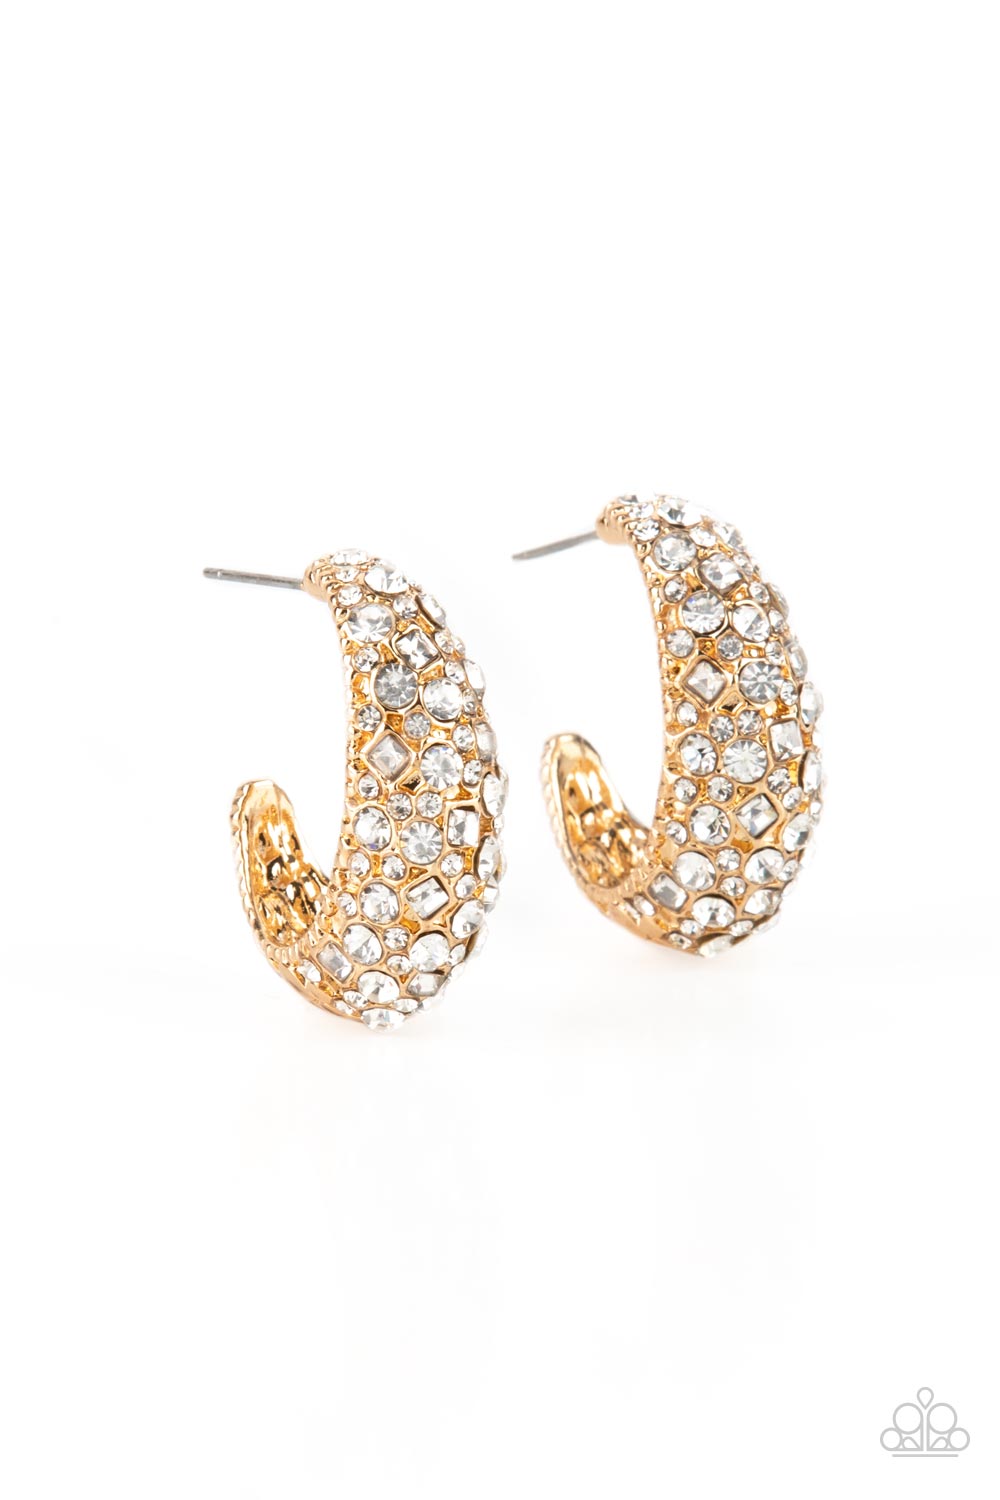 Glamorously Glimmering Gold &amp; White Rhinestone Hoop Earrings - Paparazzi Accessories- lightbox - CarasShop.com - $5 Jewelry by Cara Jewels